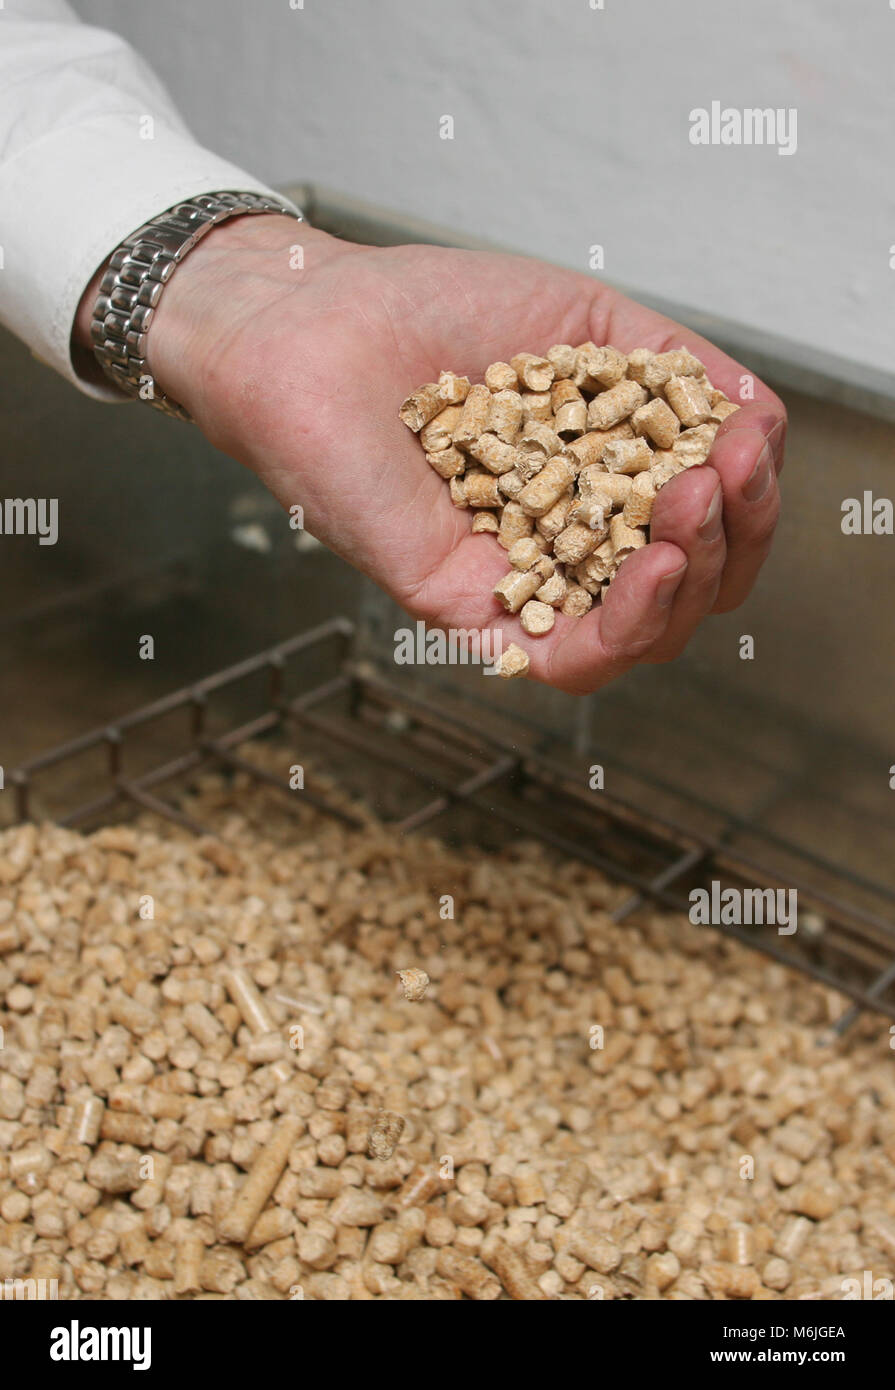 BIOMASS ENERGY Briquettes are use in a family house for heating 2007 Stock Photo